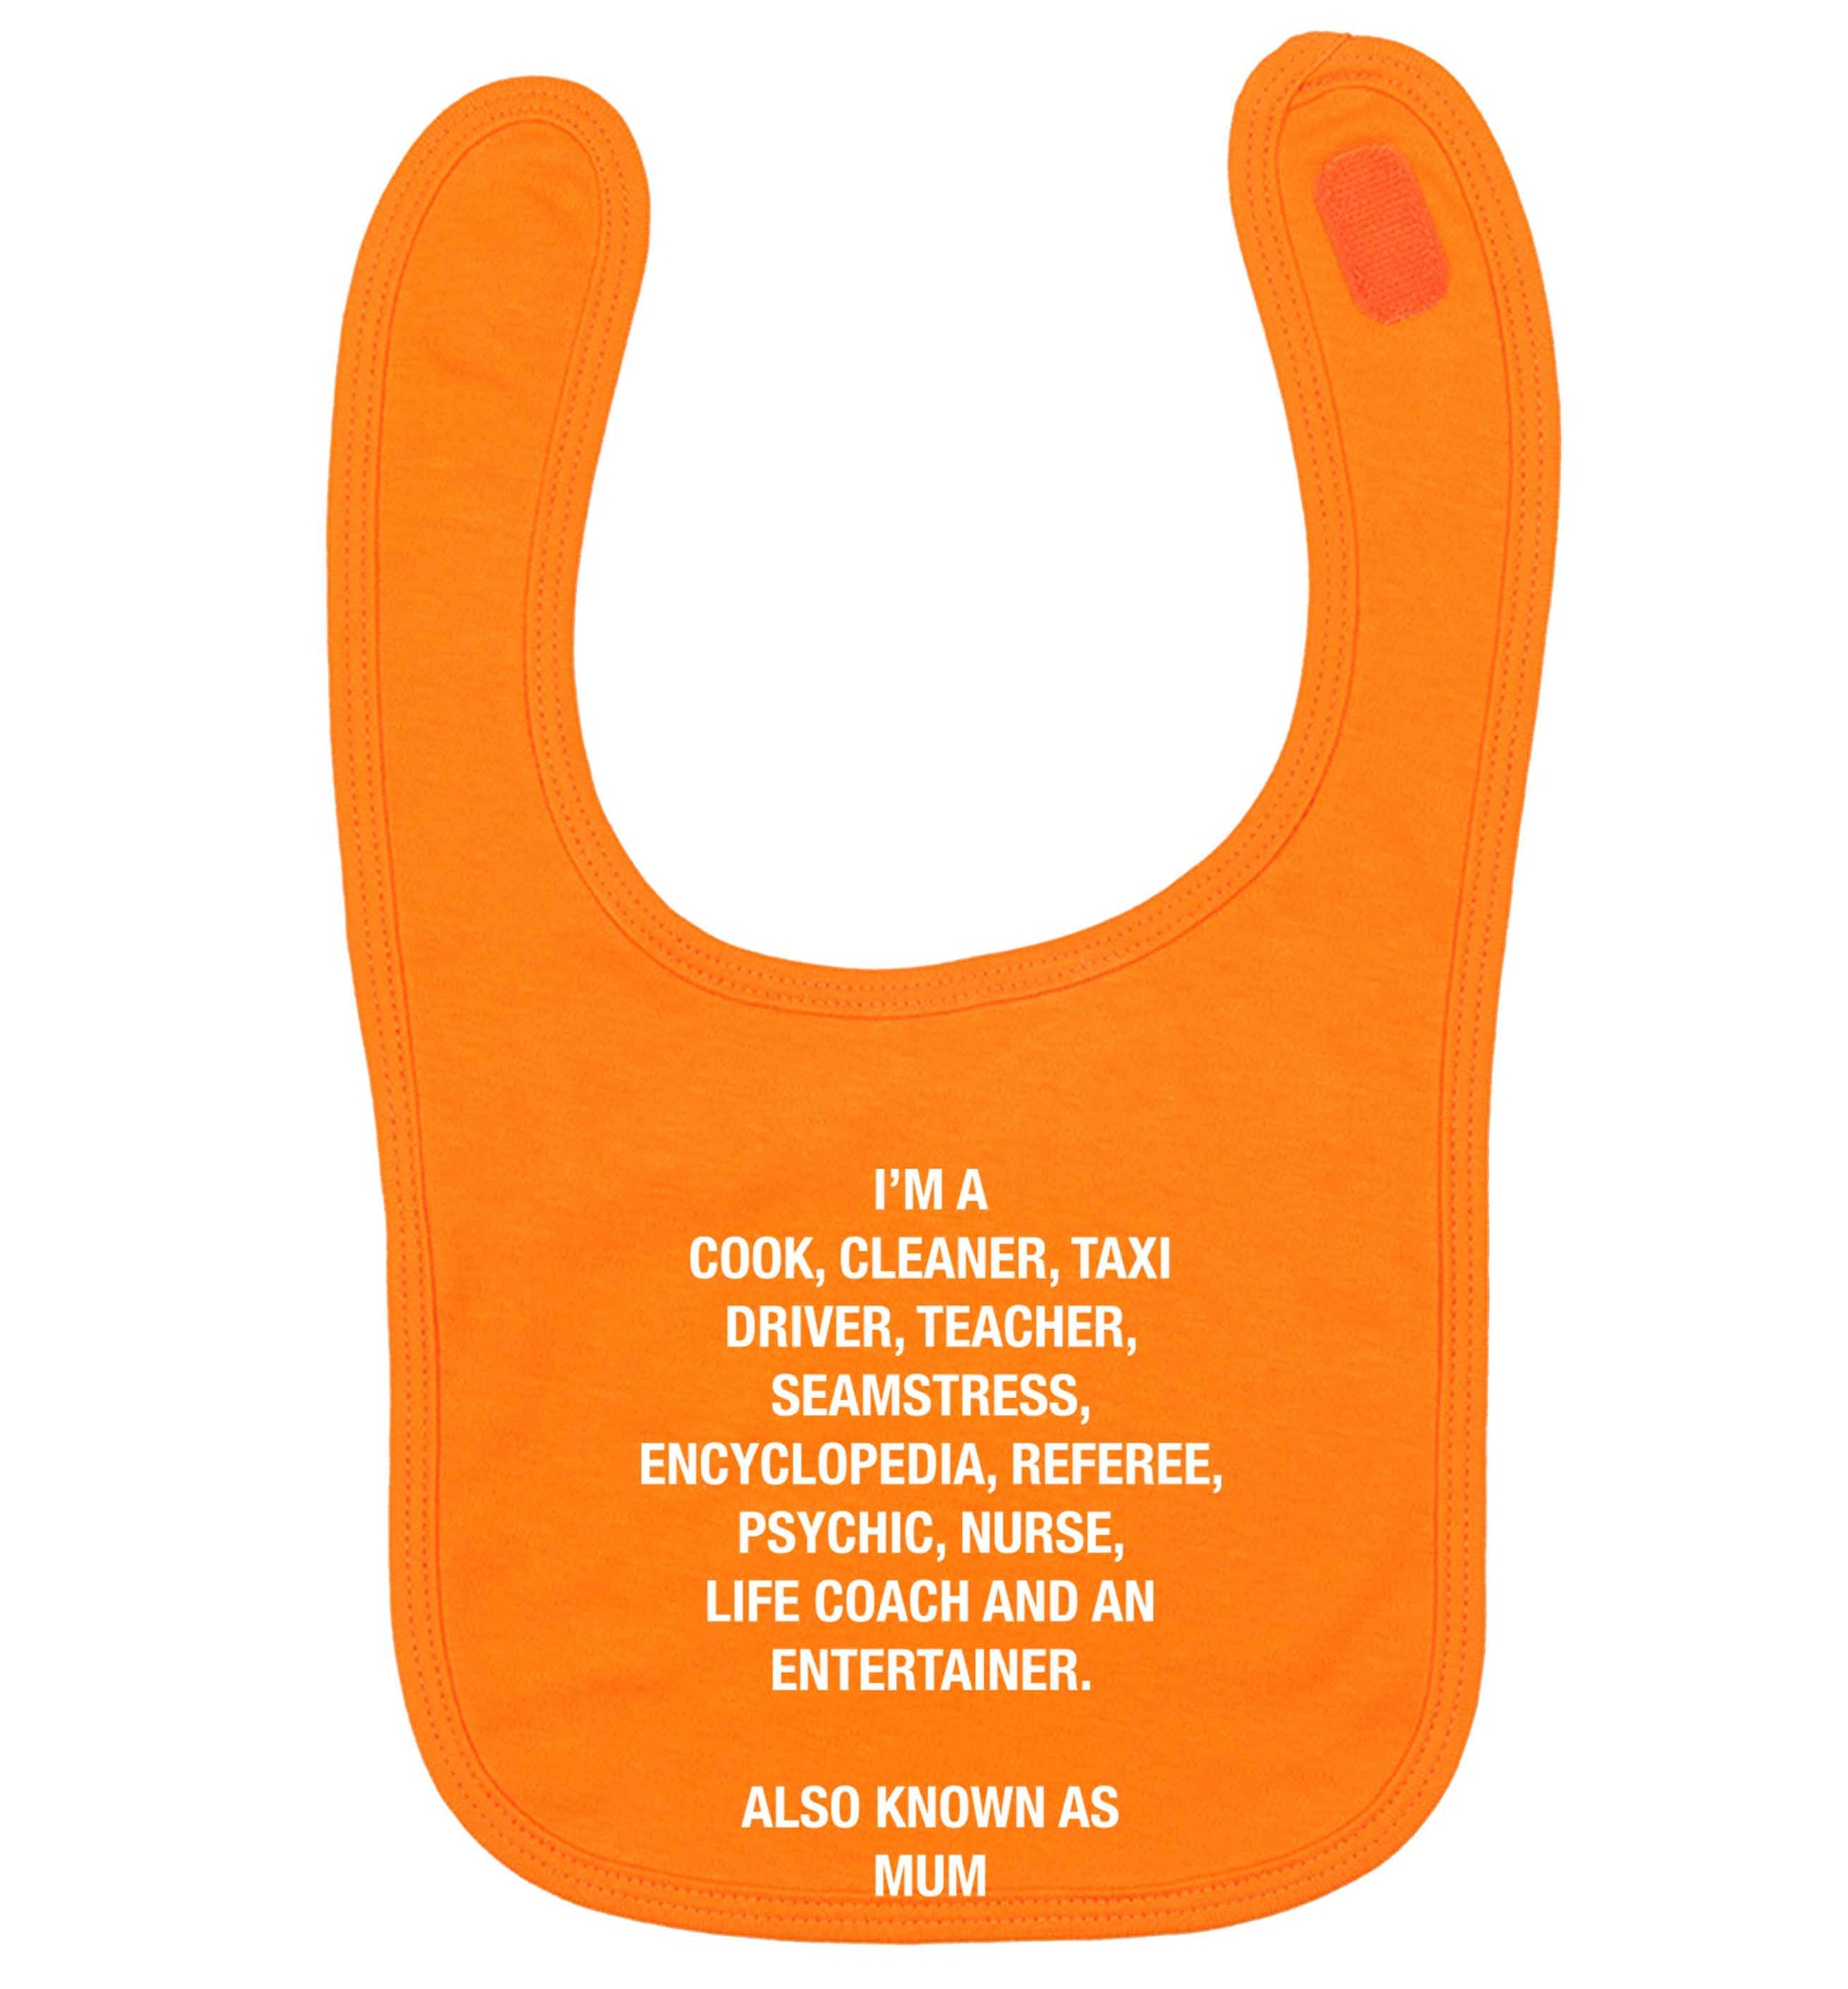 Funny gifts for your mum on mother's dayor her birthday! Mum, cook, cleaner, taxi driver, teacher, seamstress, encyclopedia, referee, psychic, nurse, life coach and entertainer orange baby bib